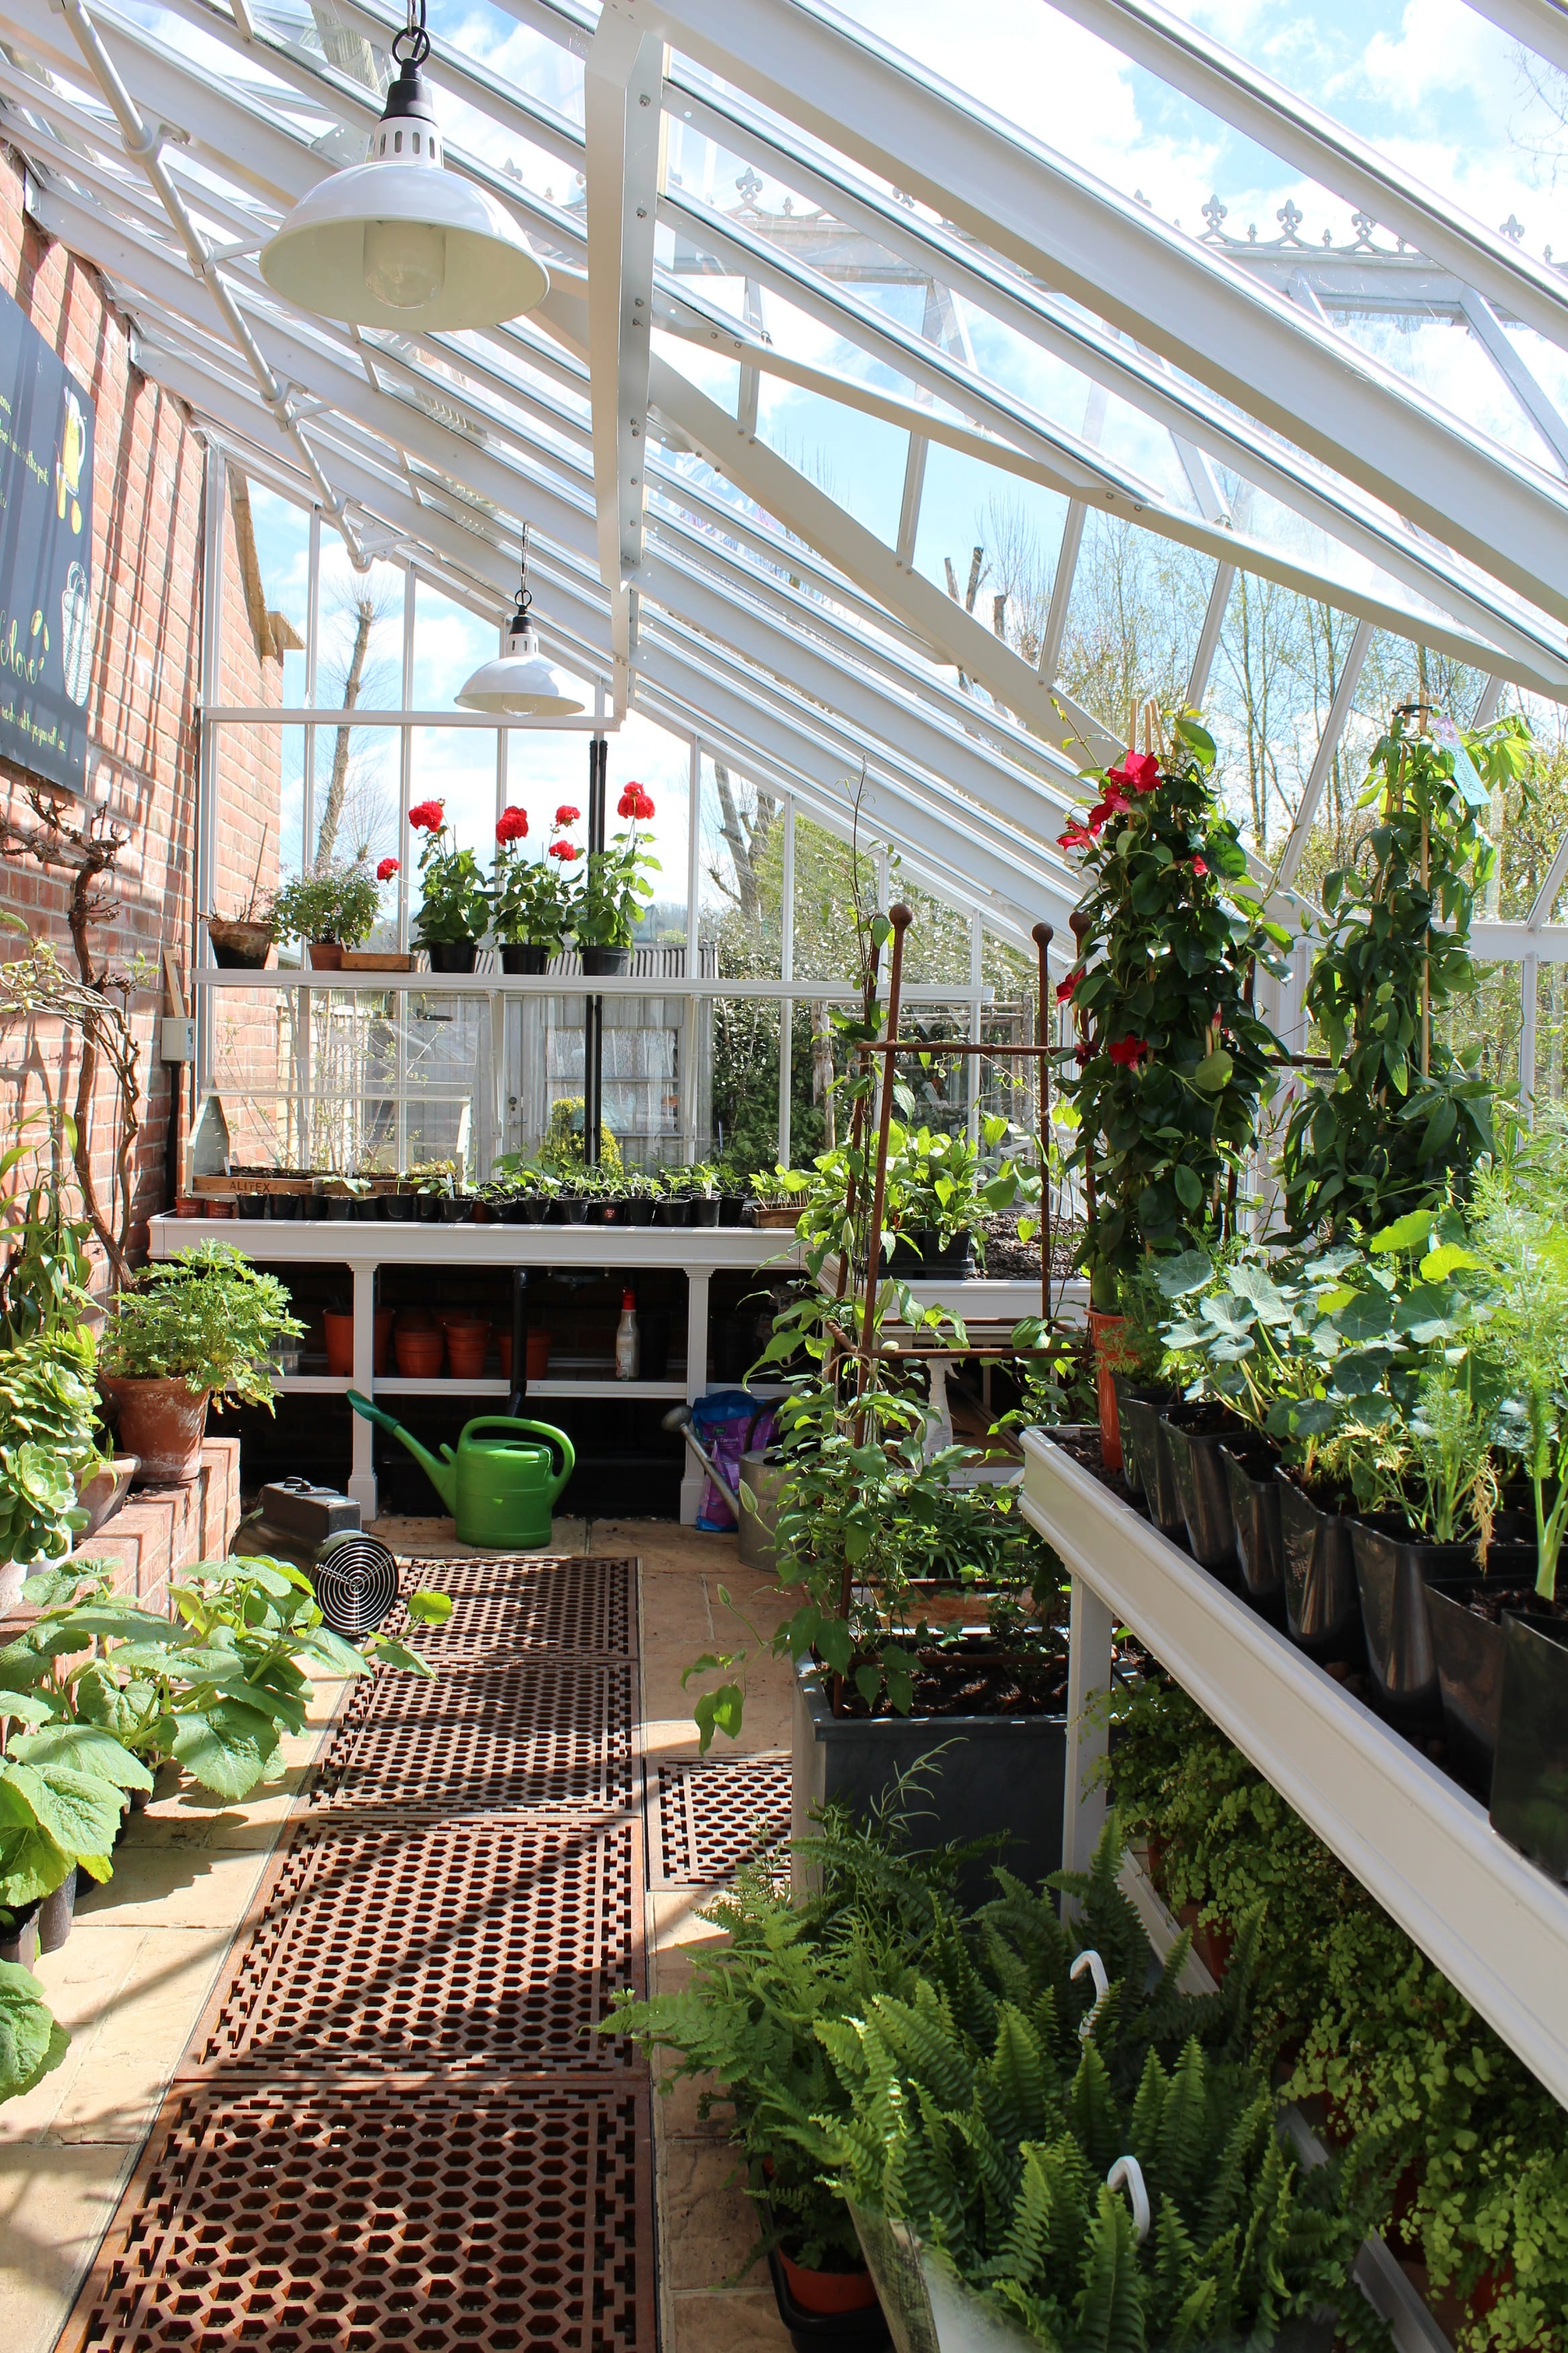 Inside a lean-to greenhouse